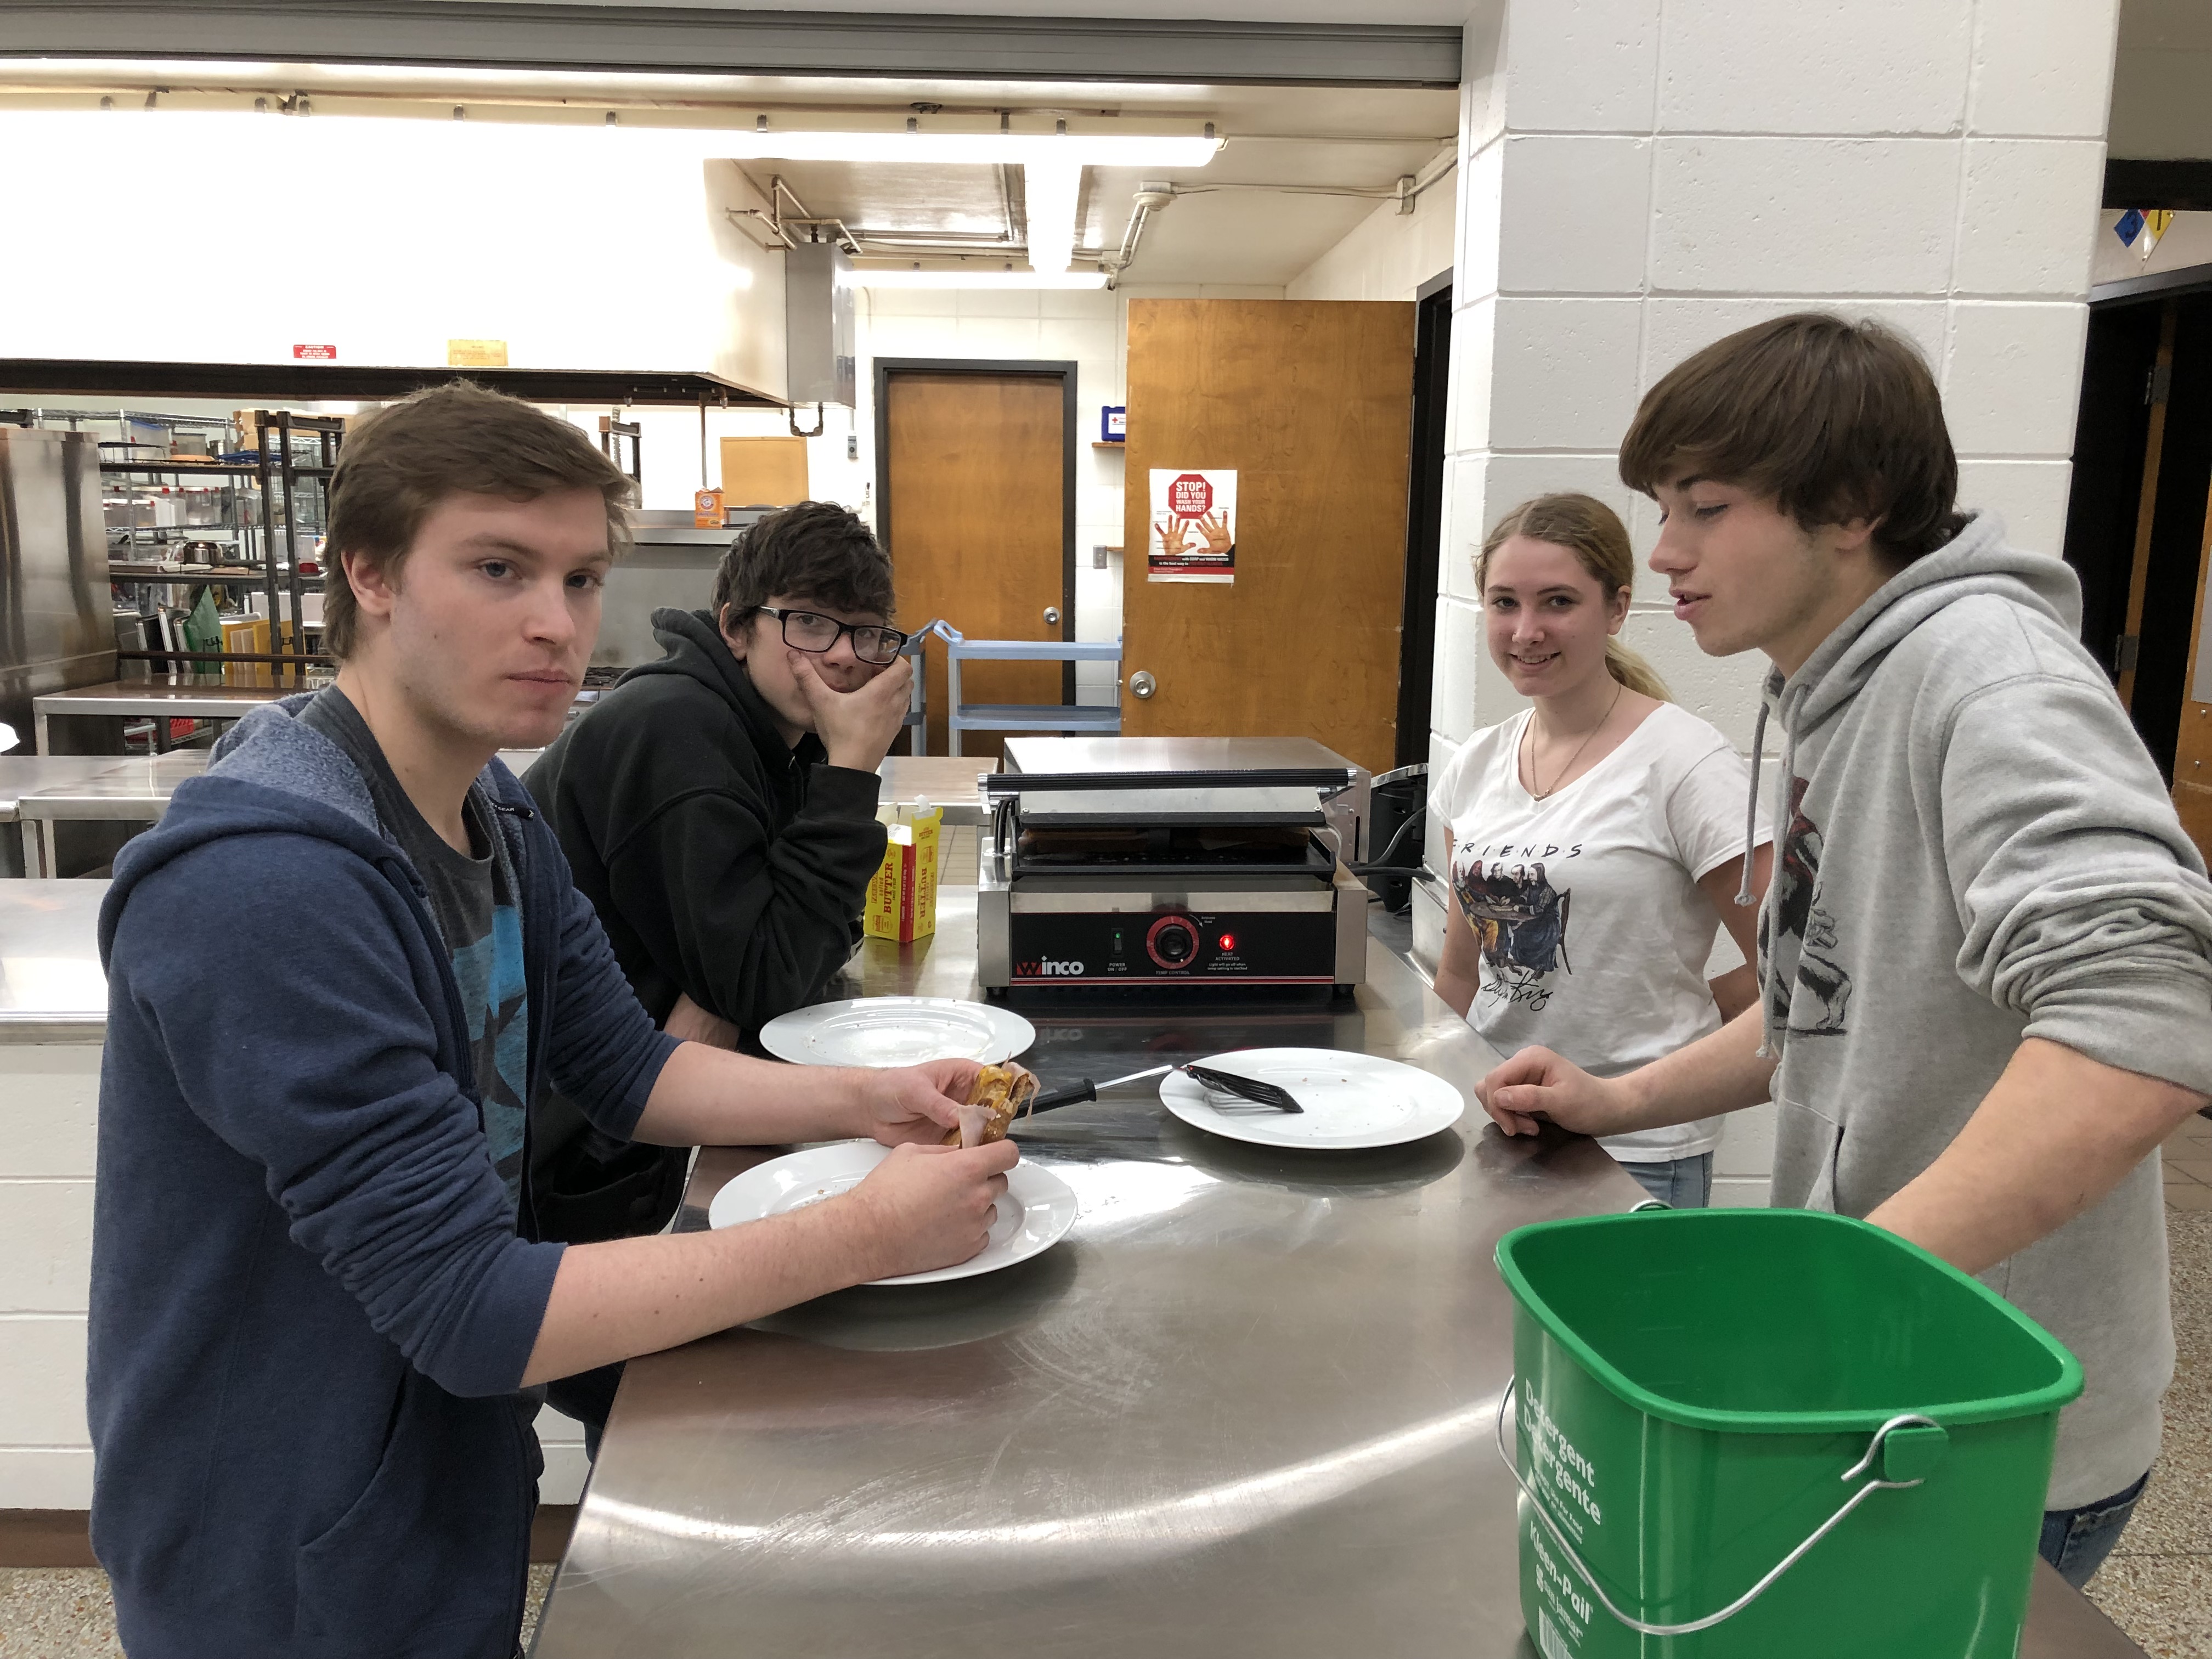 Foods I Classes are wrapping up their food lab experience by making Panini sandwiches on our Panini grills. These are Italian sandwiches that are toasted on each side at the same time. After each lab the students fill out a lab report explaining what they made, prep terms they performed, what they learned from the lab, and what, if anything, would they change. During Food Labs students use their problem solving skills, time management, team player, and leadership skills. A great way to learn with hands-on lessons that you get to eat your homework! 